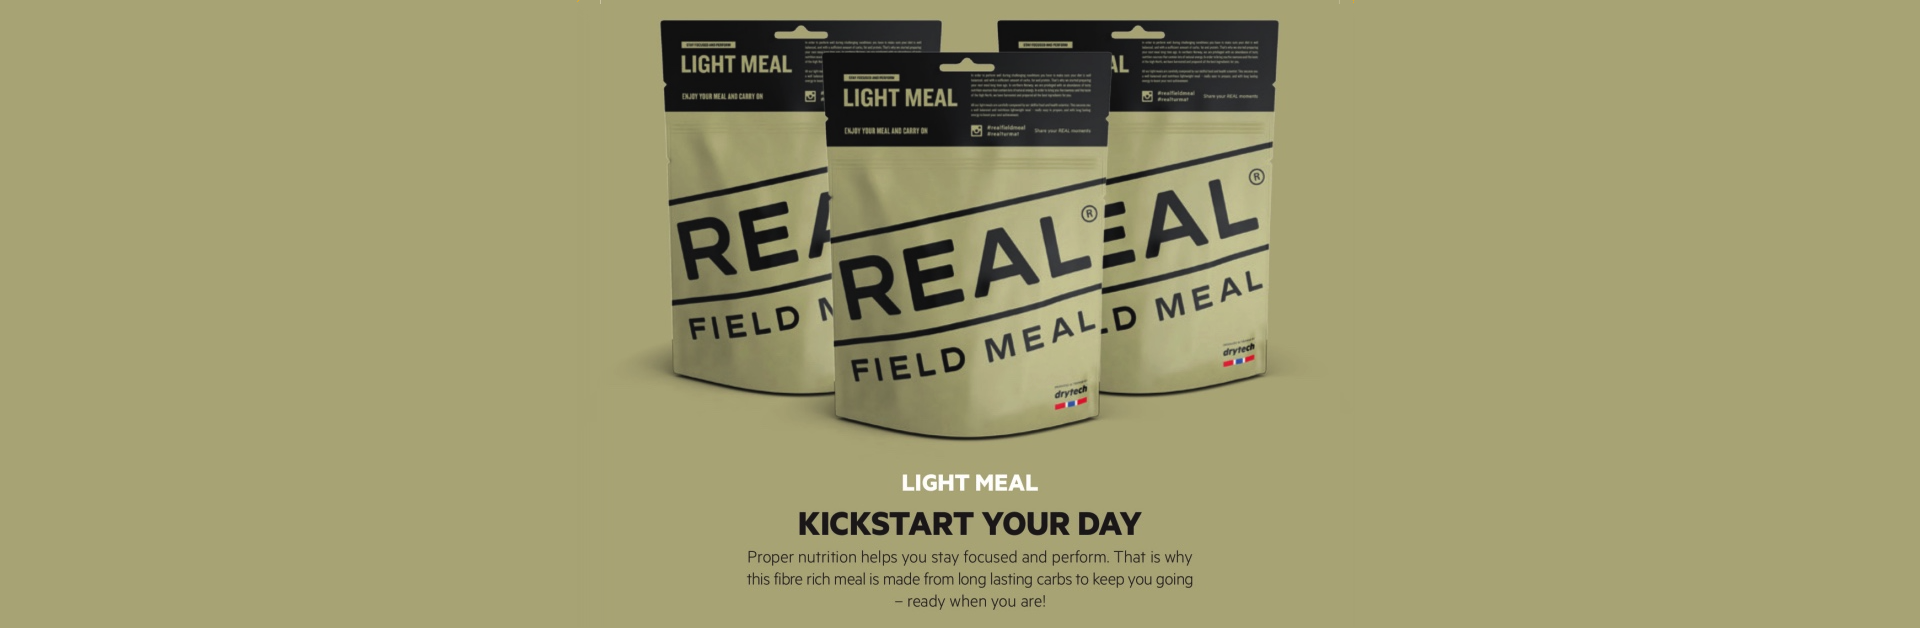 Kickstart your day with REAL Field Meal